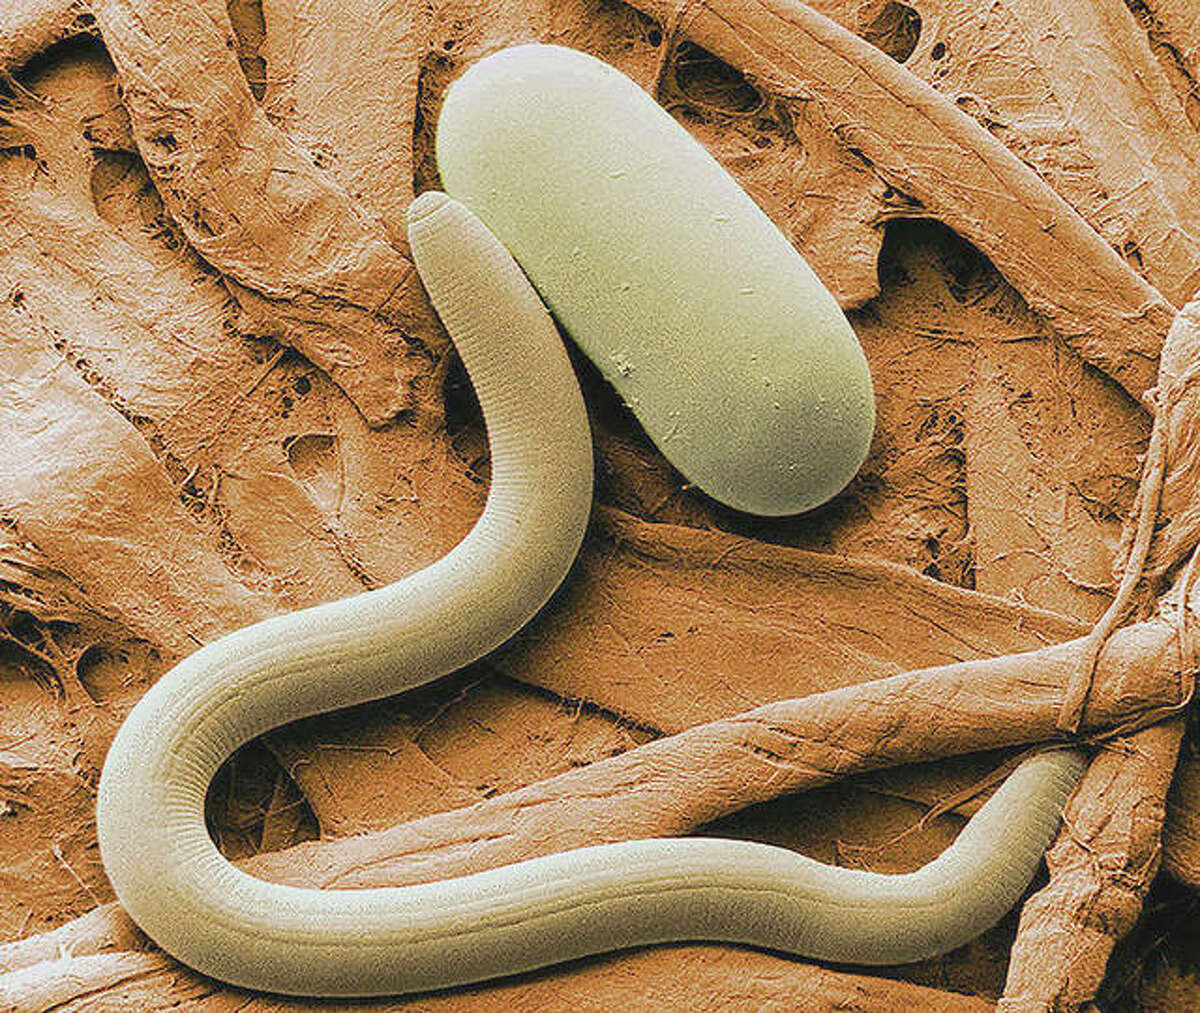 The soybean cyst nematode is a major pathogen of soybeans. A juvenile nematode is pictured here with an egg.